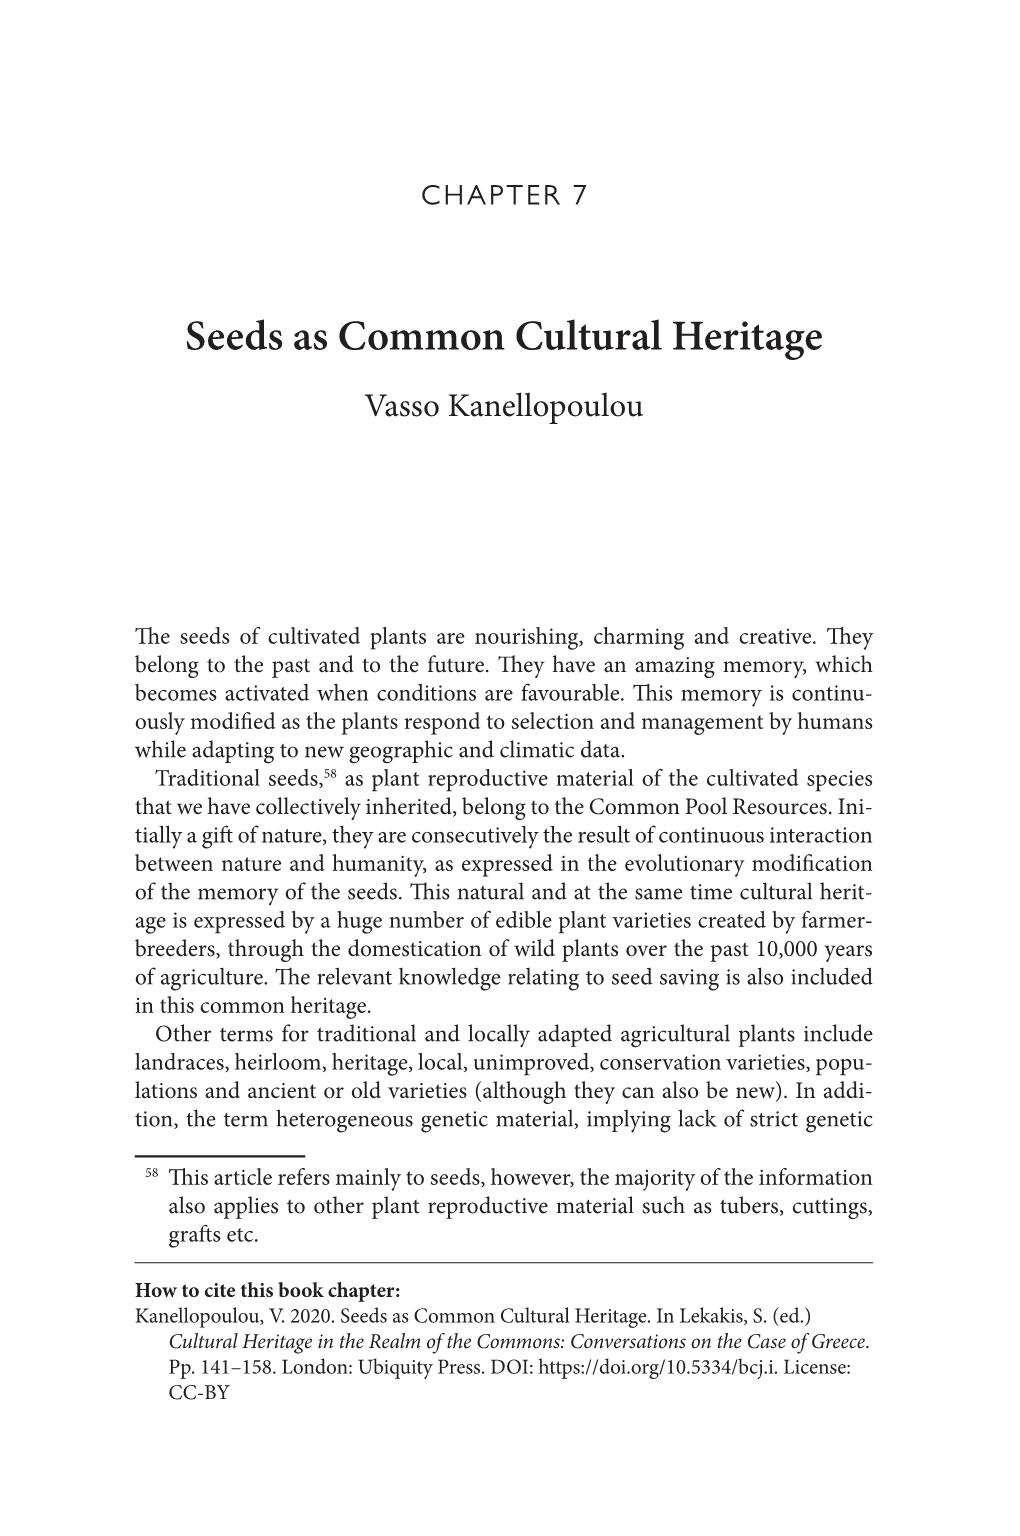 Seeds As Common Cultural Heritage Vasso Kanellopoulou